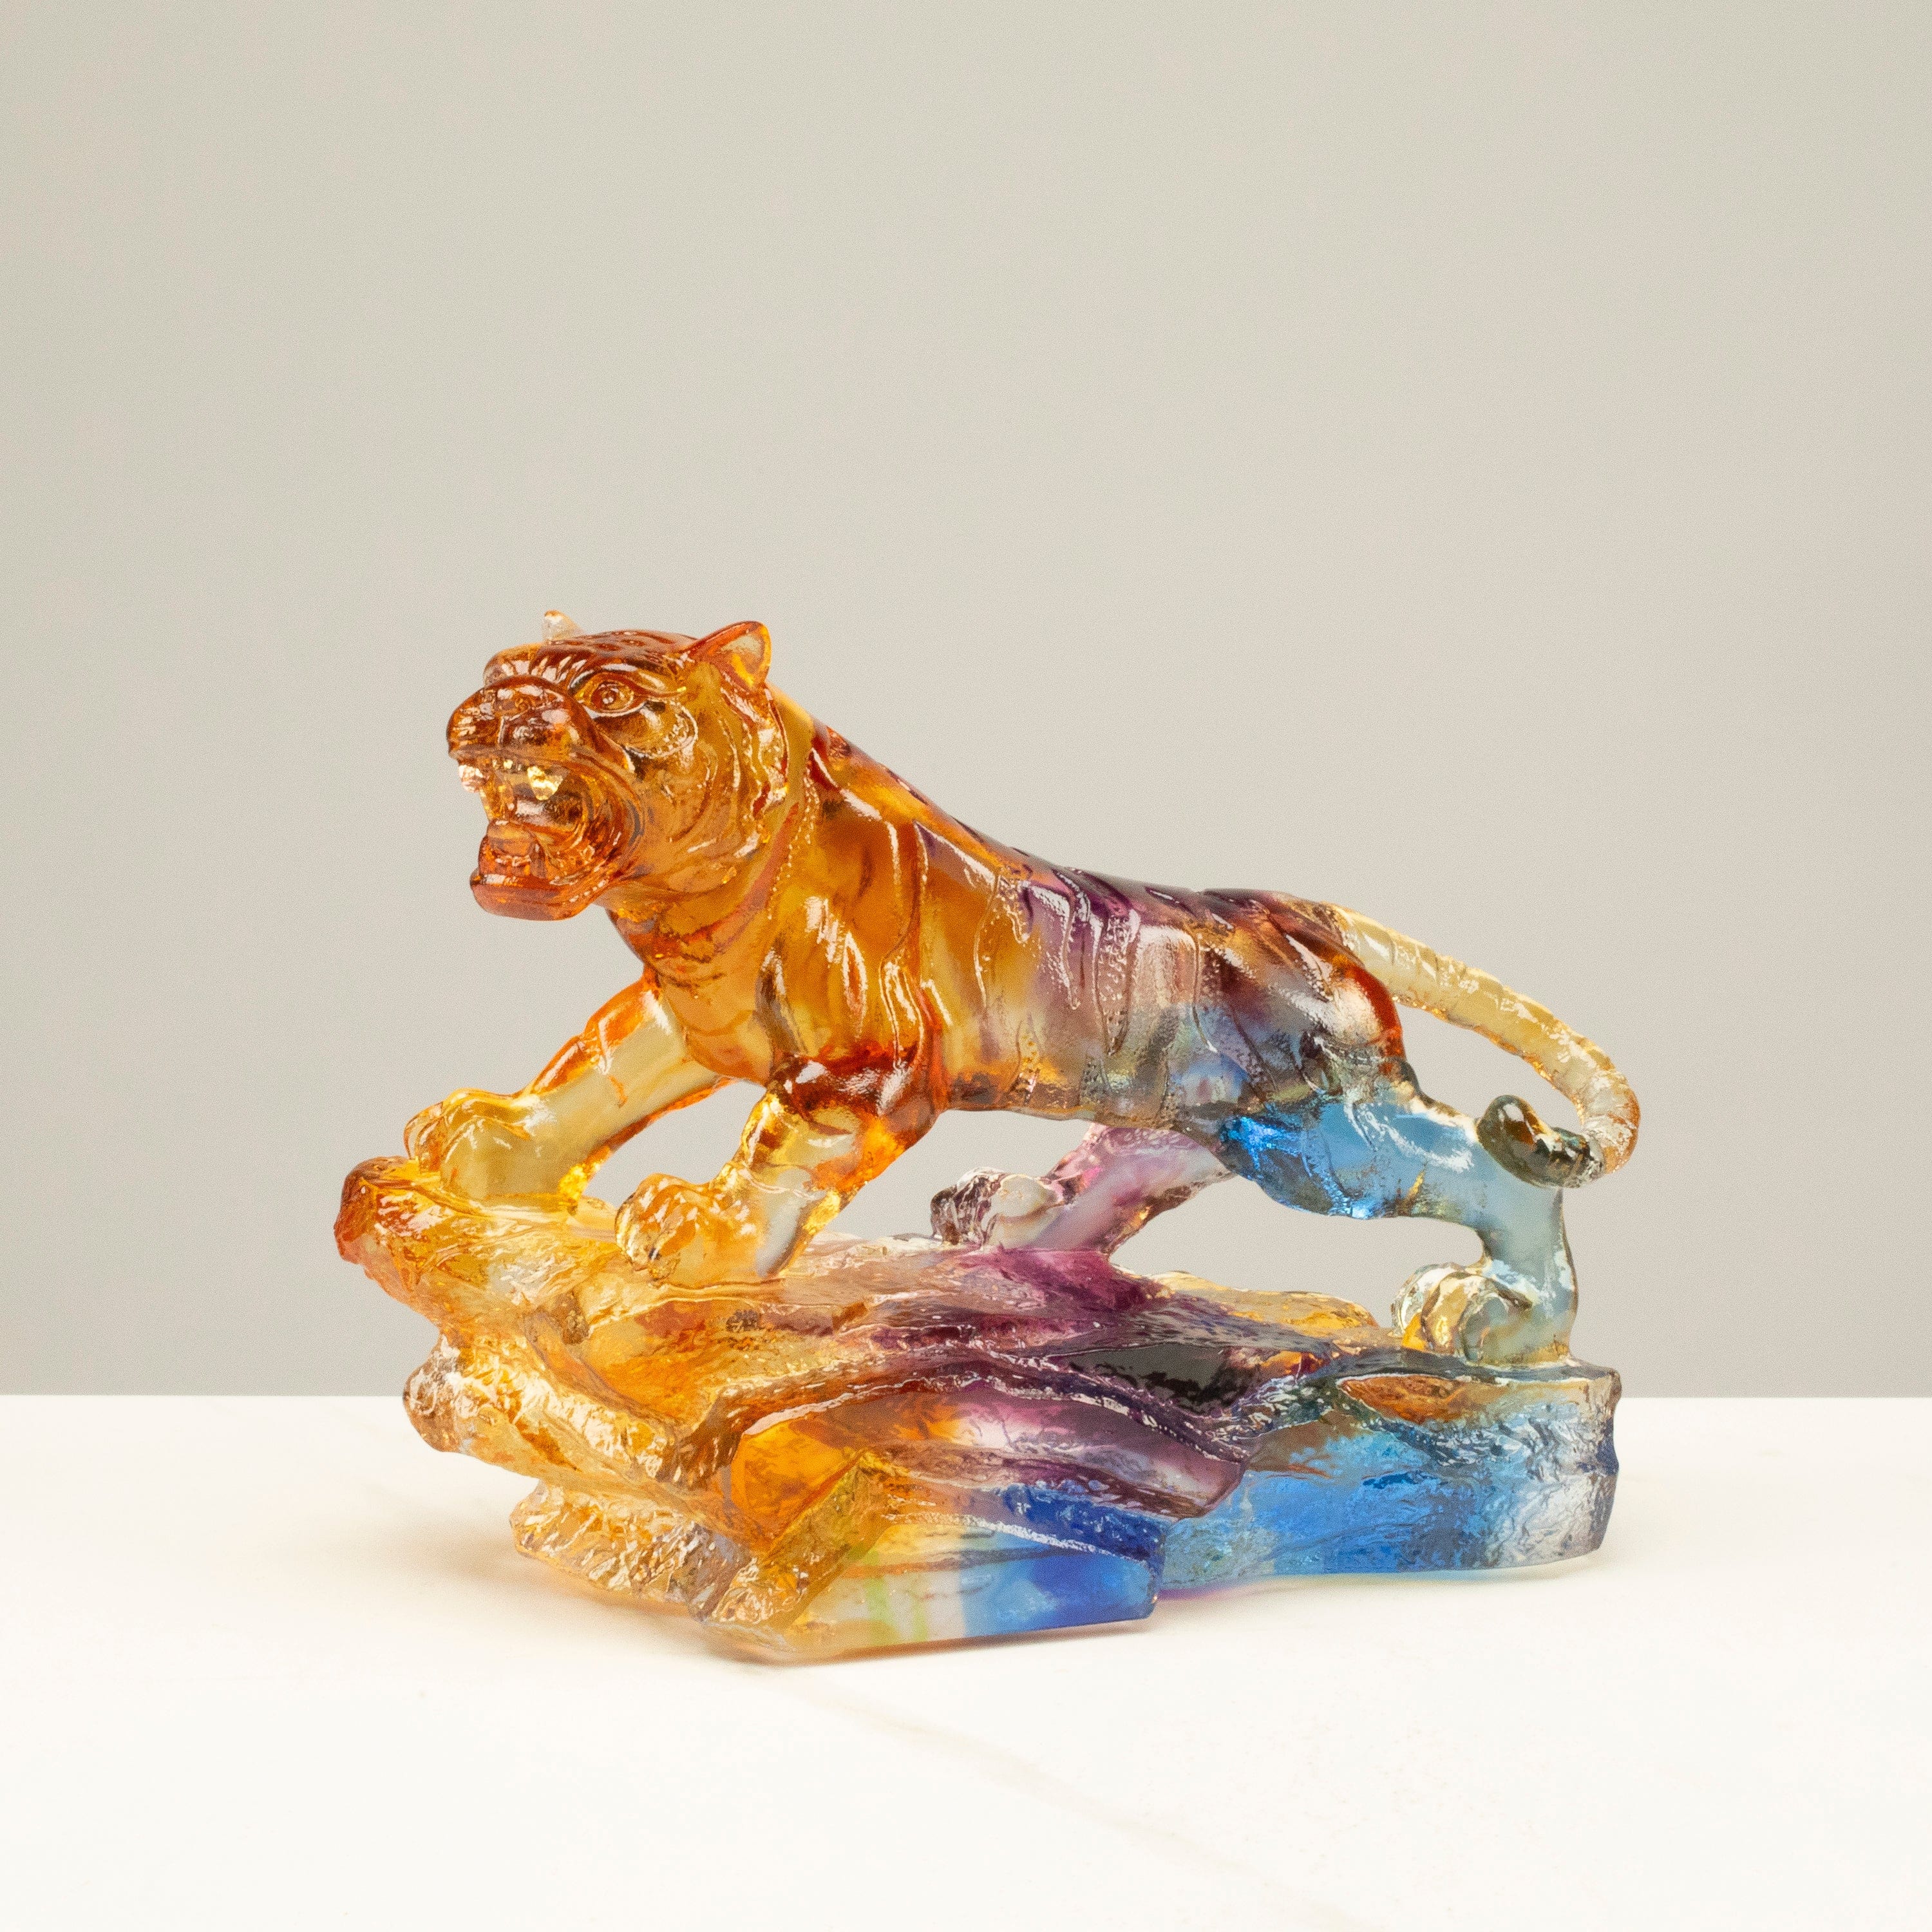 Kalifano Crystal Carving Roaring Tiger Crystal Carving - A Symbol of Courage and Strength CR280-TIG